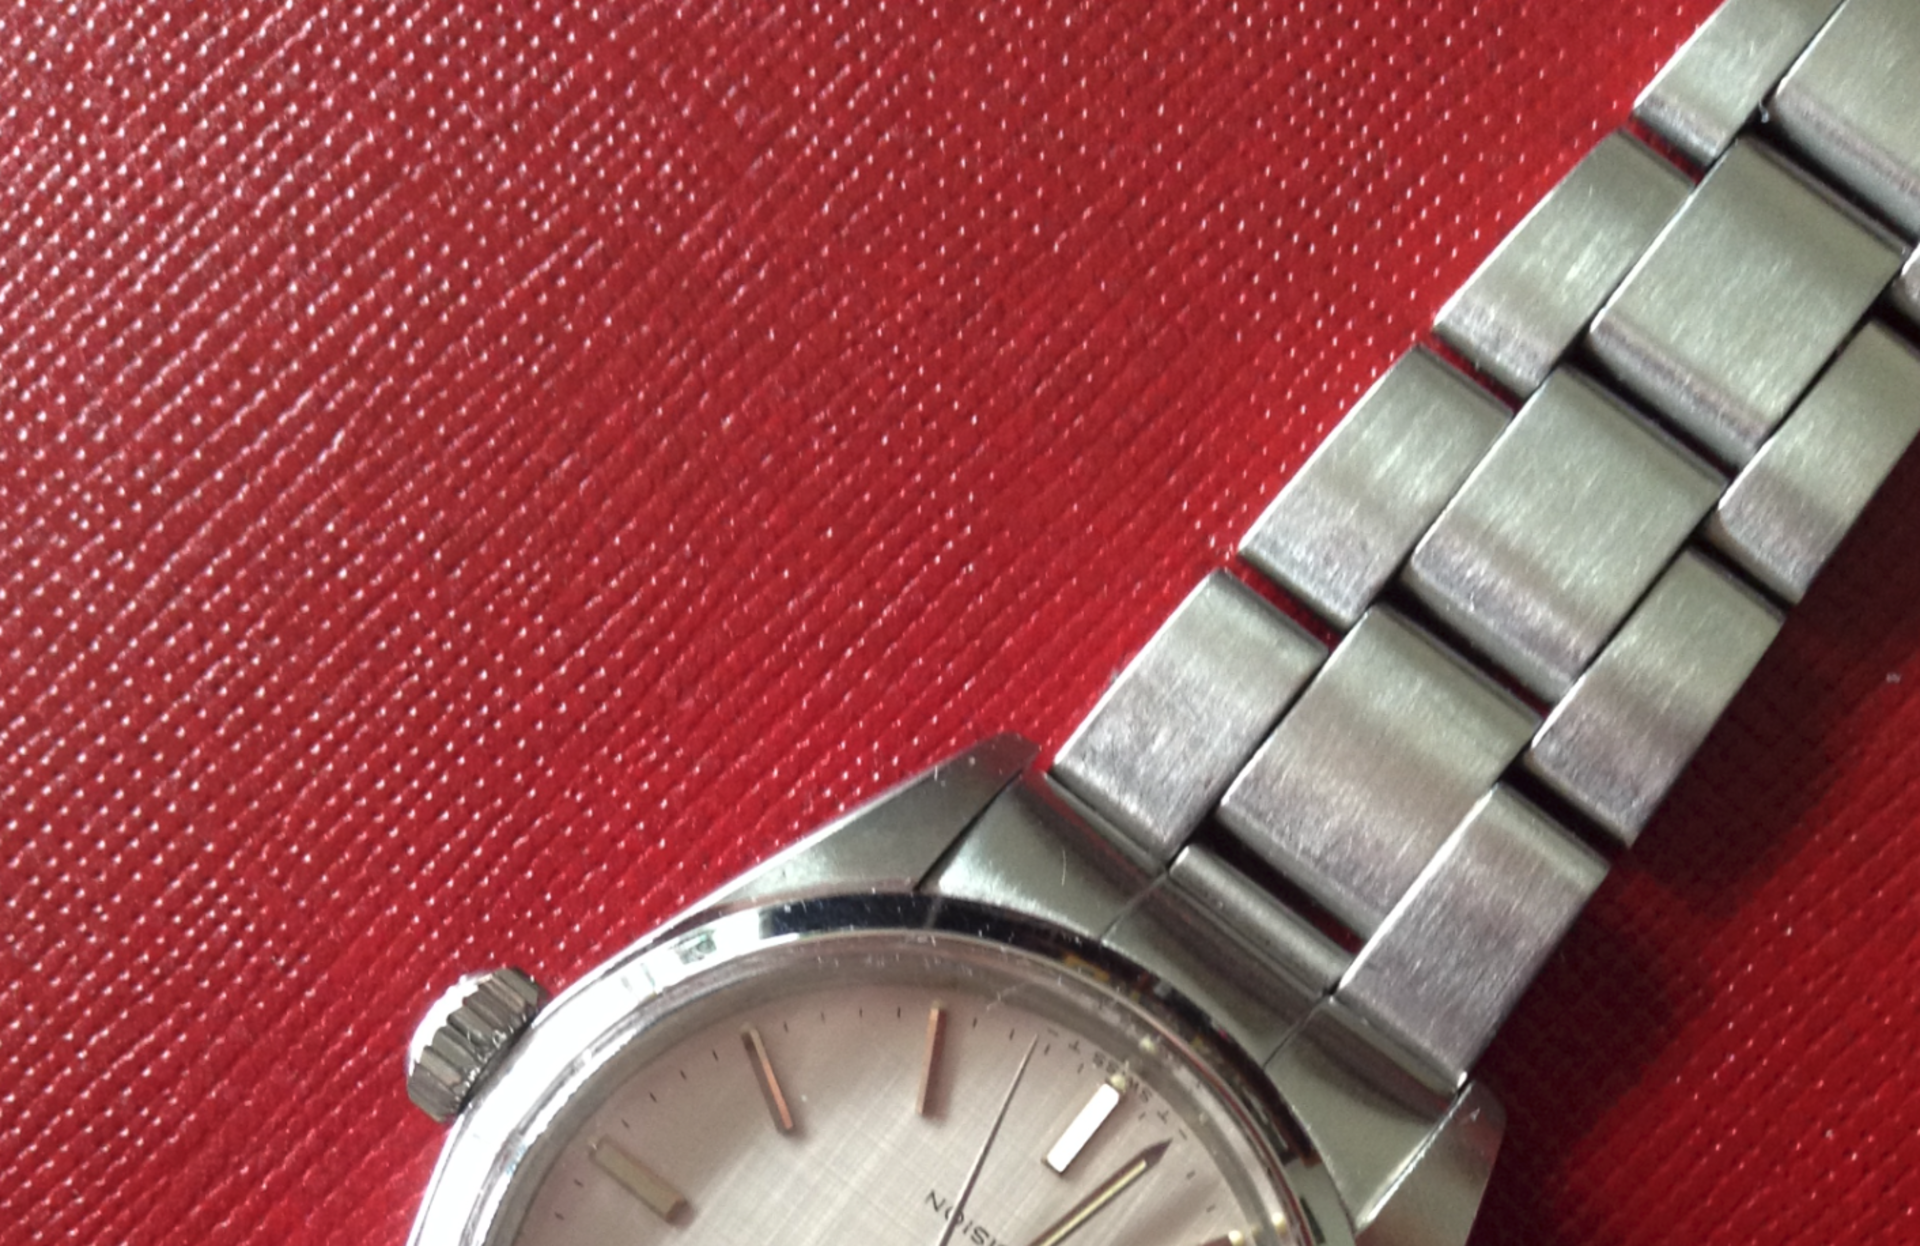 Rolex Gents Oyster Precision 6426 Stainless Steel with Silver Linen Dial 1972 **Reserve Lowered** - Image 5 of 9